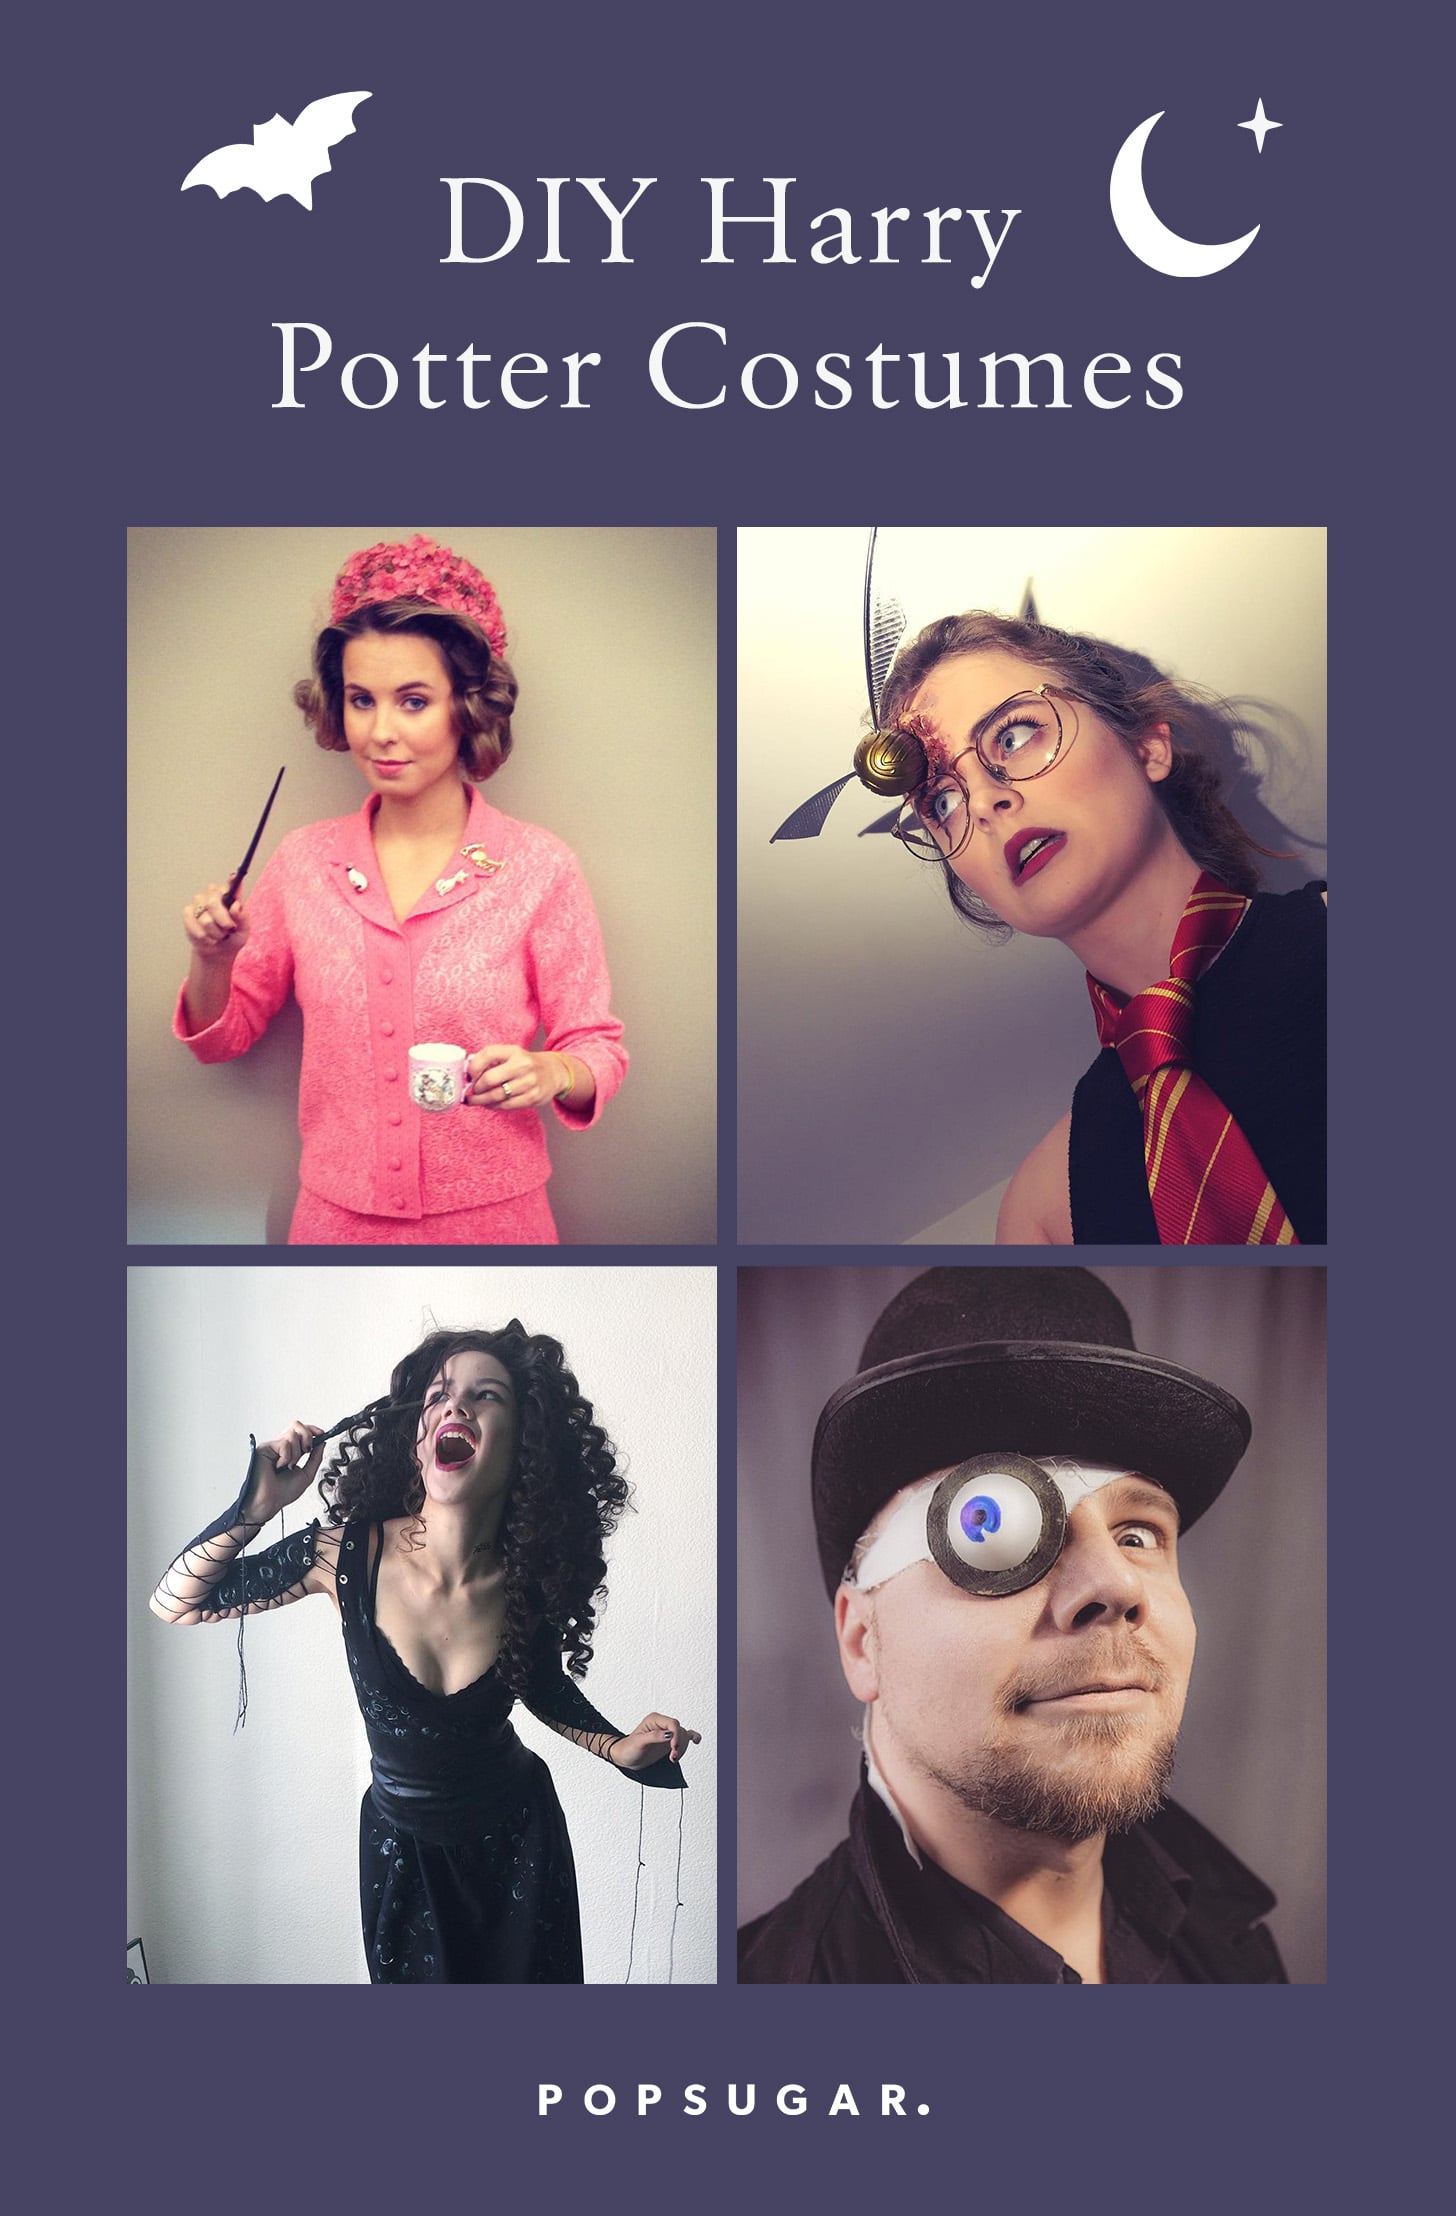 10 Harry Potter Halloween Costumes You Haven't Thought Of - B&N Reads